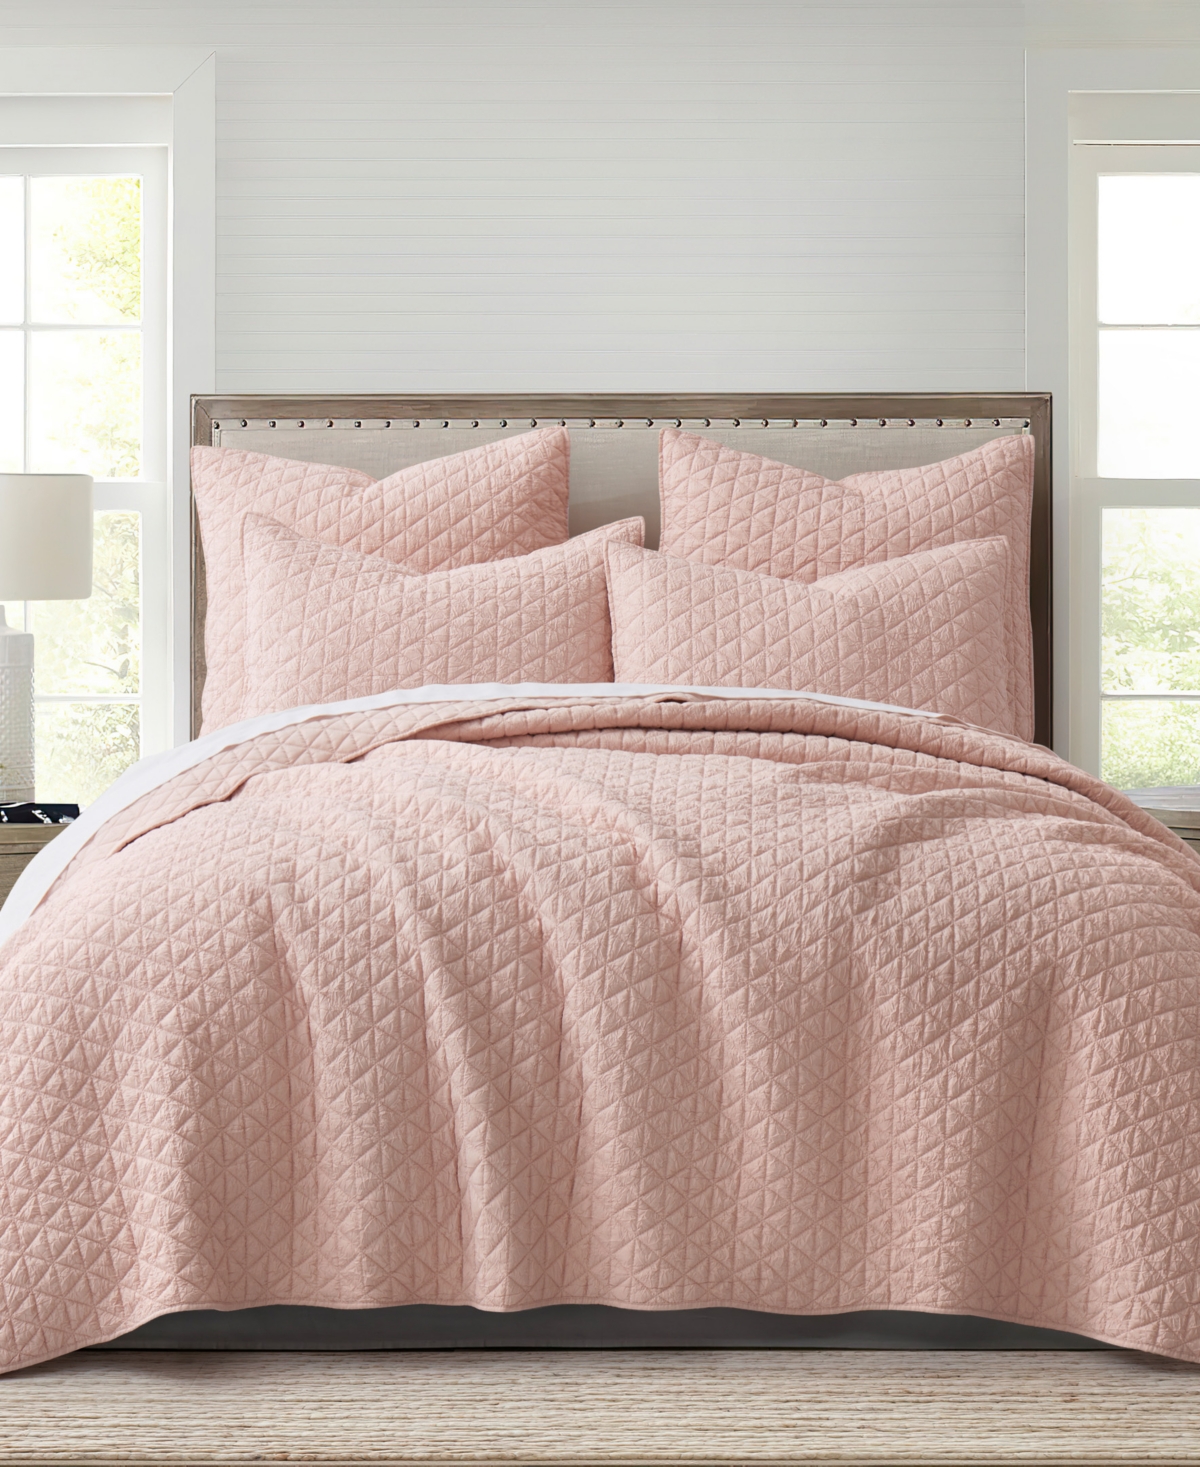 Levtex Homthreads Rowan Enzyme Wash 3-pc. Quilt Set, King/california King In Pink